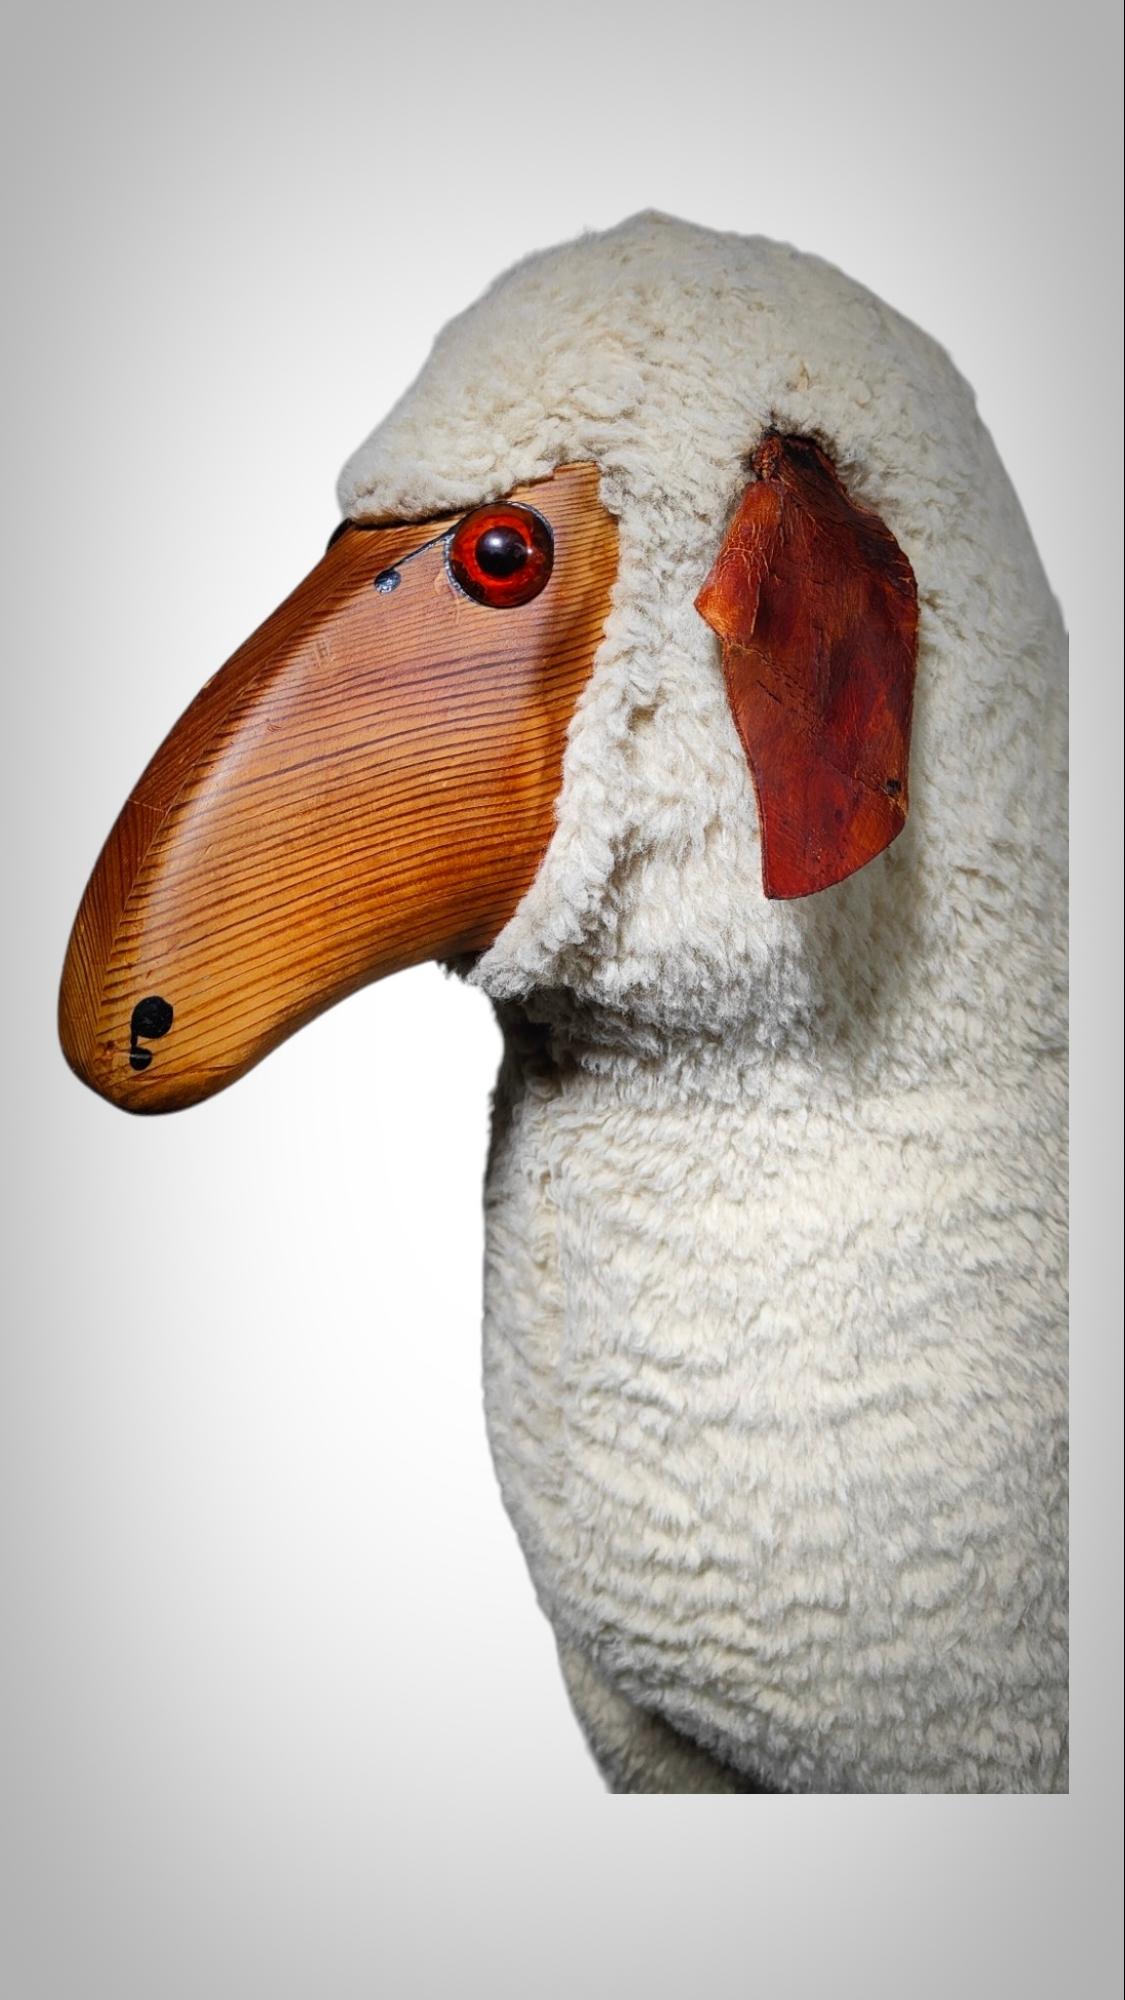 Vintage Sheep Sculpture in the Style of Francois- Xavier Lalanne
Style of Francois-Xavier Lalanne (French, 1927-2008). Figural sheep sculpture composed of teak wood, sheepskin, wool, and orange glass eyes. The sheep is attentive and stares directly